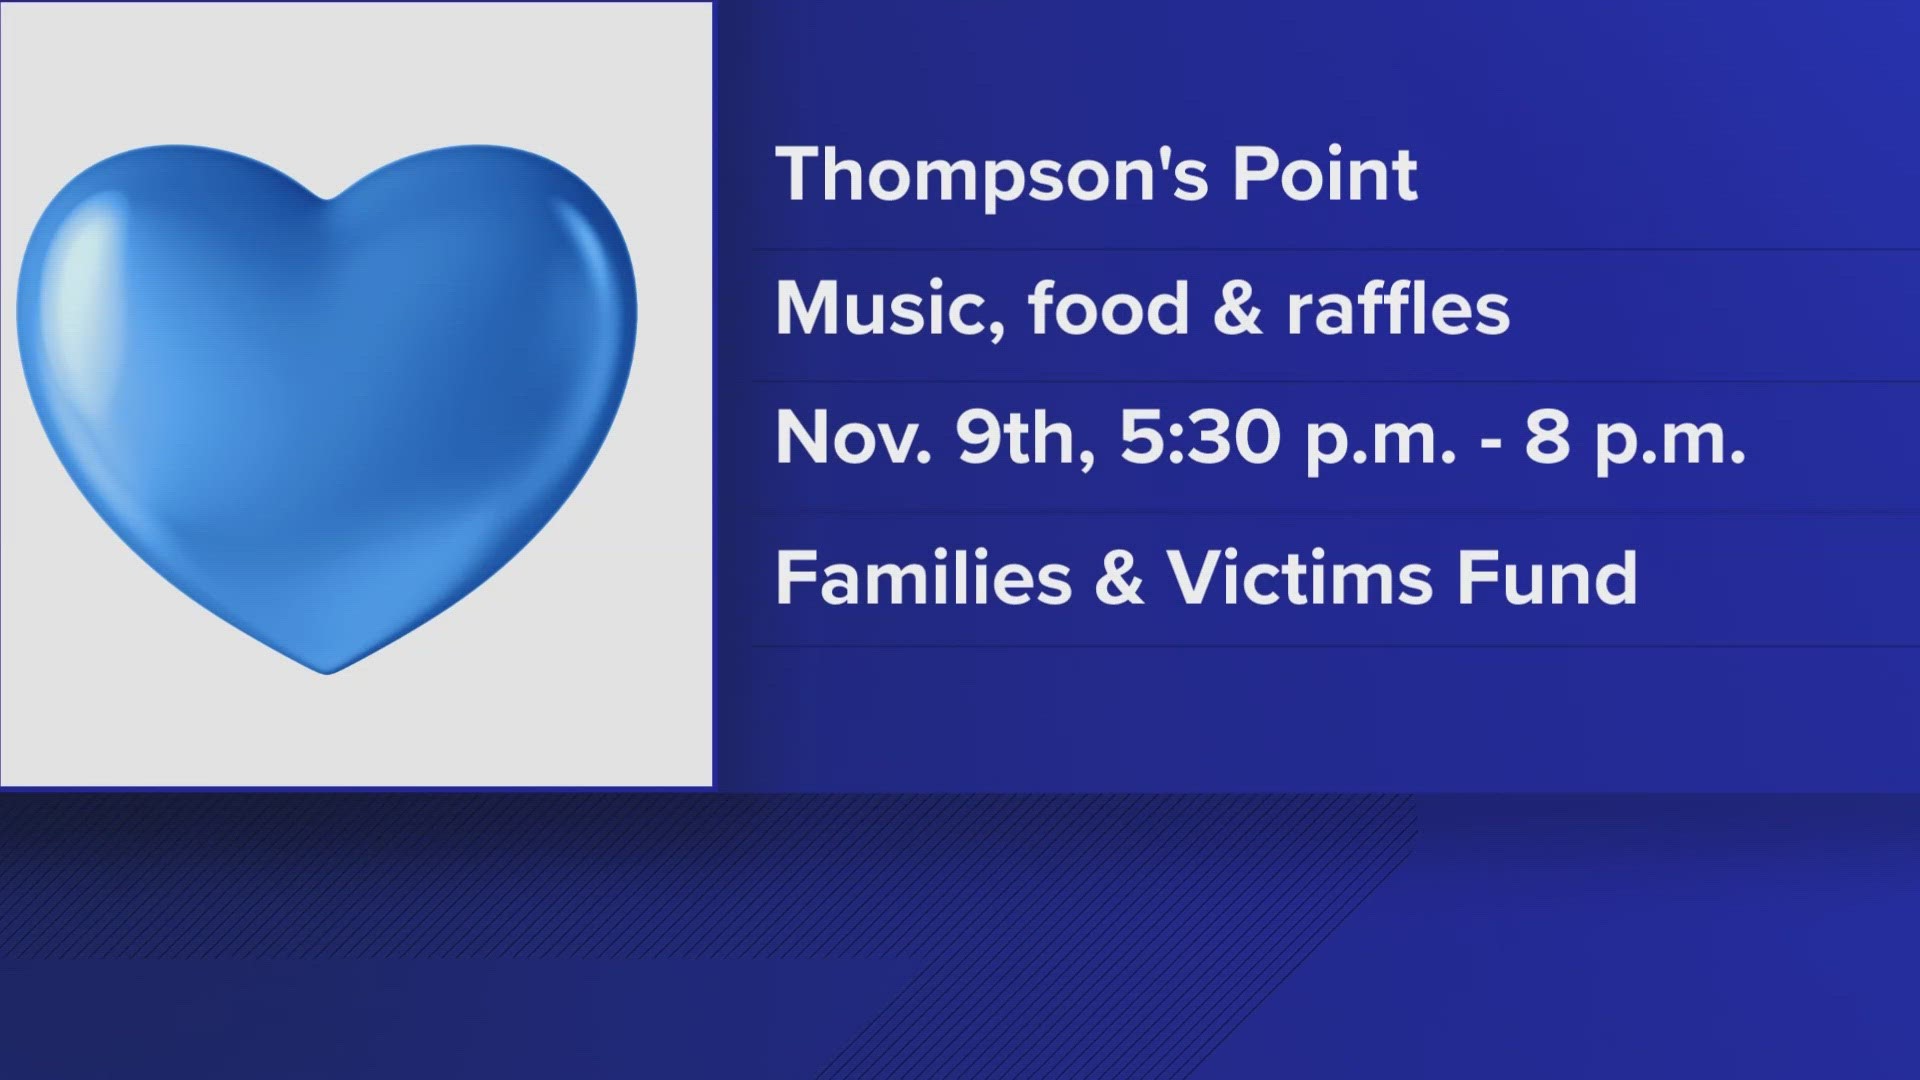 After the mass shooting on Oct. 25 in Lewiston, Thompson's Point will host an event to raise money for the "City of Lewiston's Families and Victims Fund" on Nov. 9.